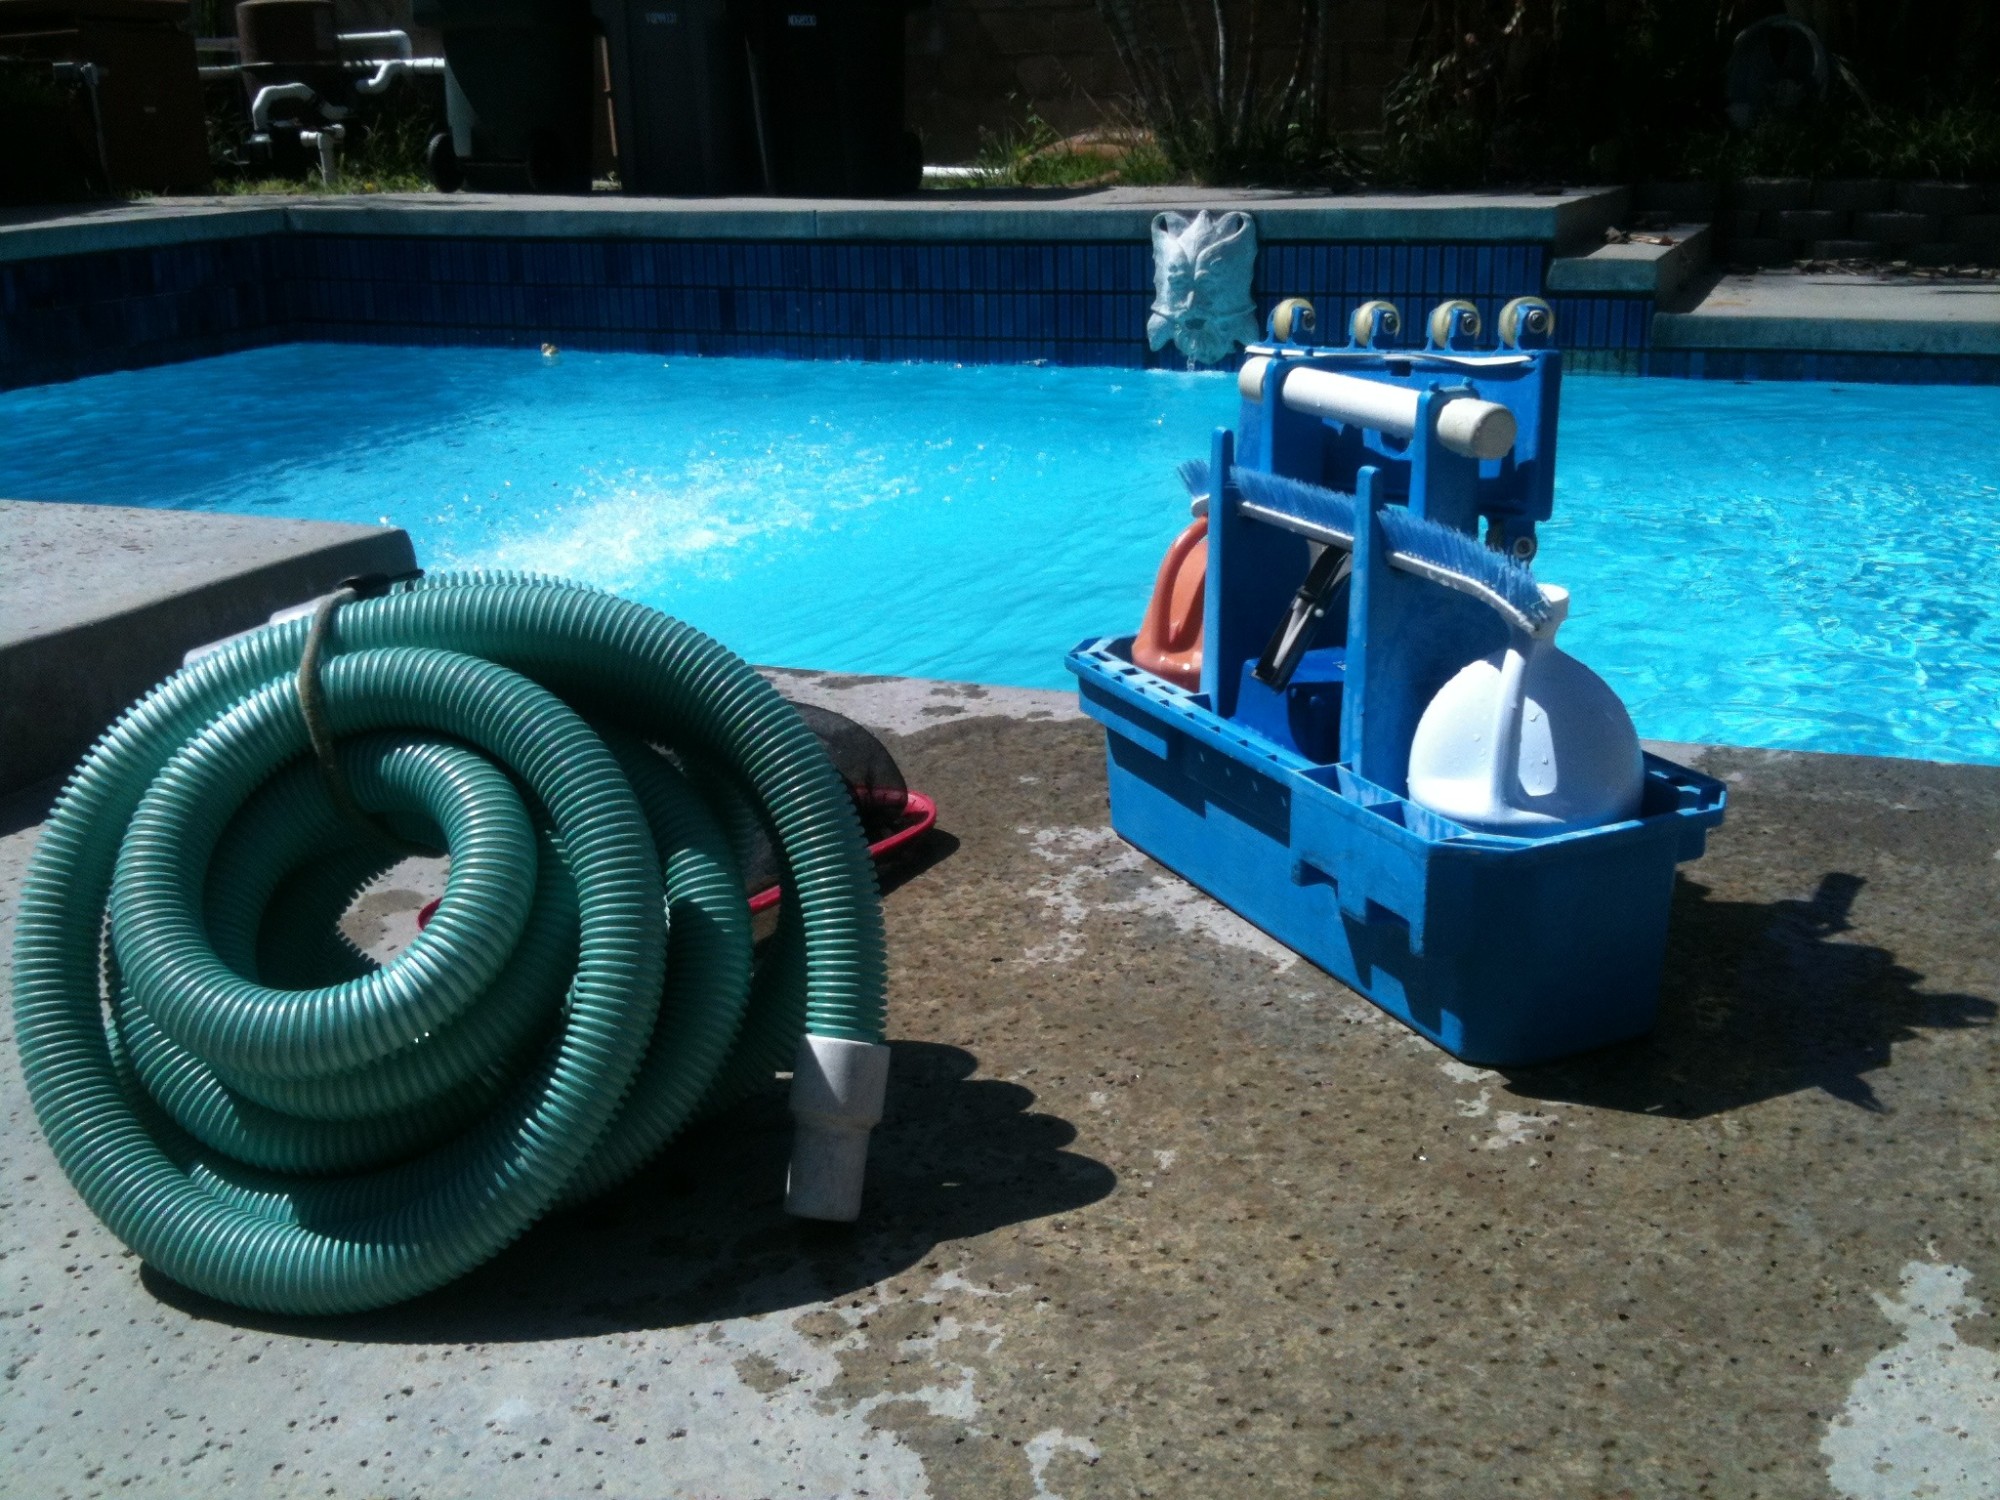 Pool cleaning near me: Do you want to know how to choose the right pool cleaning company? Read on to learn how to make the right choice.